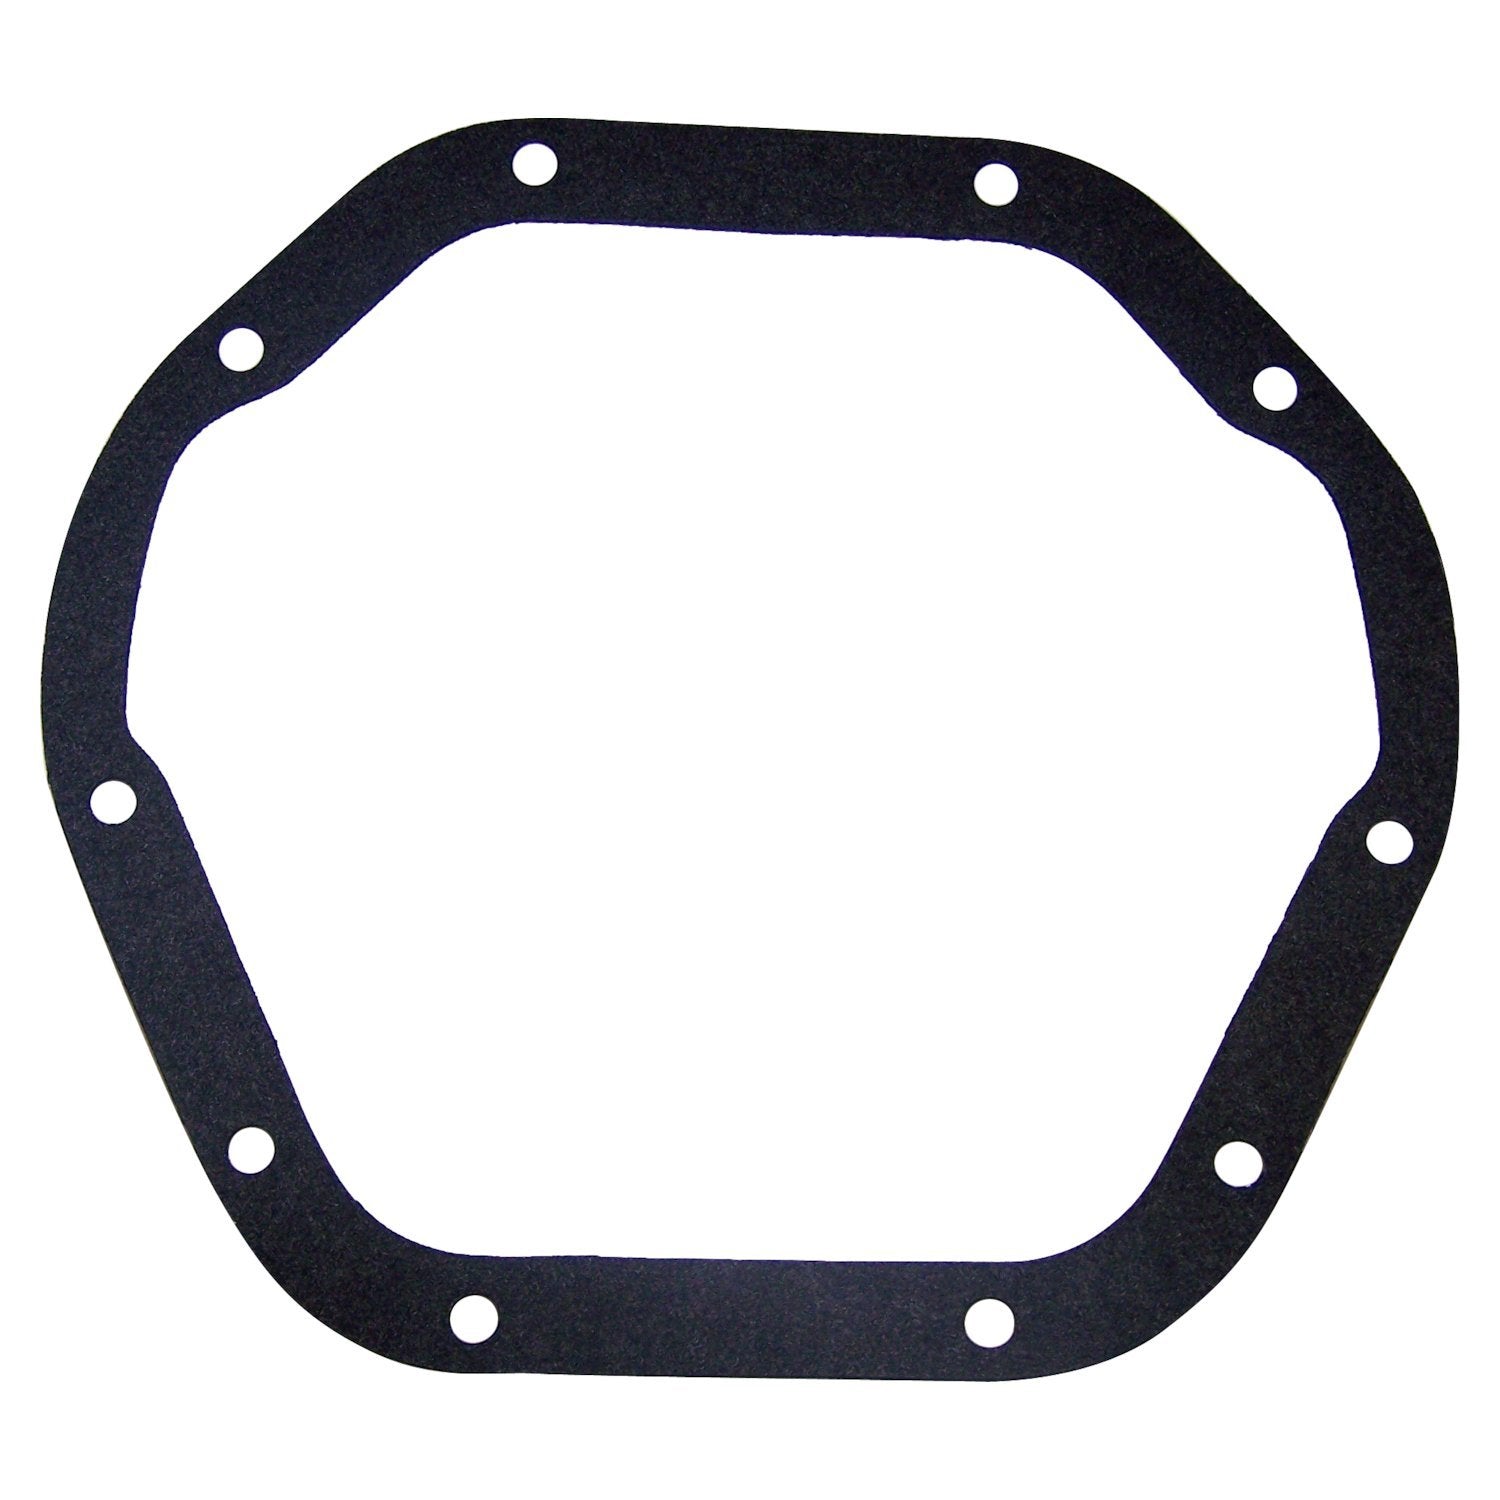 Differential Cover Gasket for Multiple Jeep / Willys vehicles w/ Dana 44 Axles